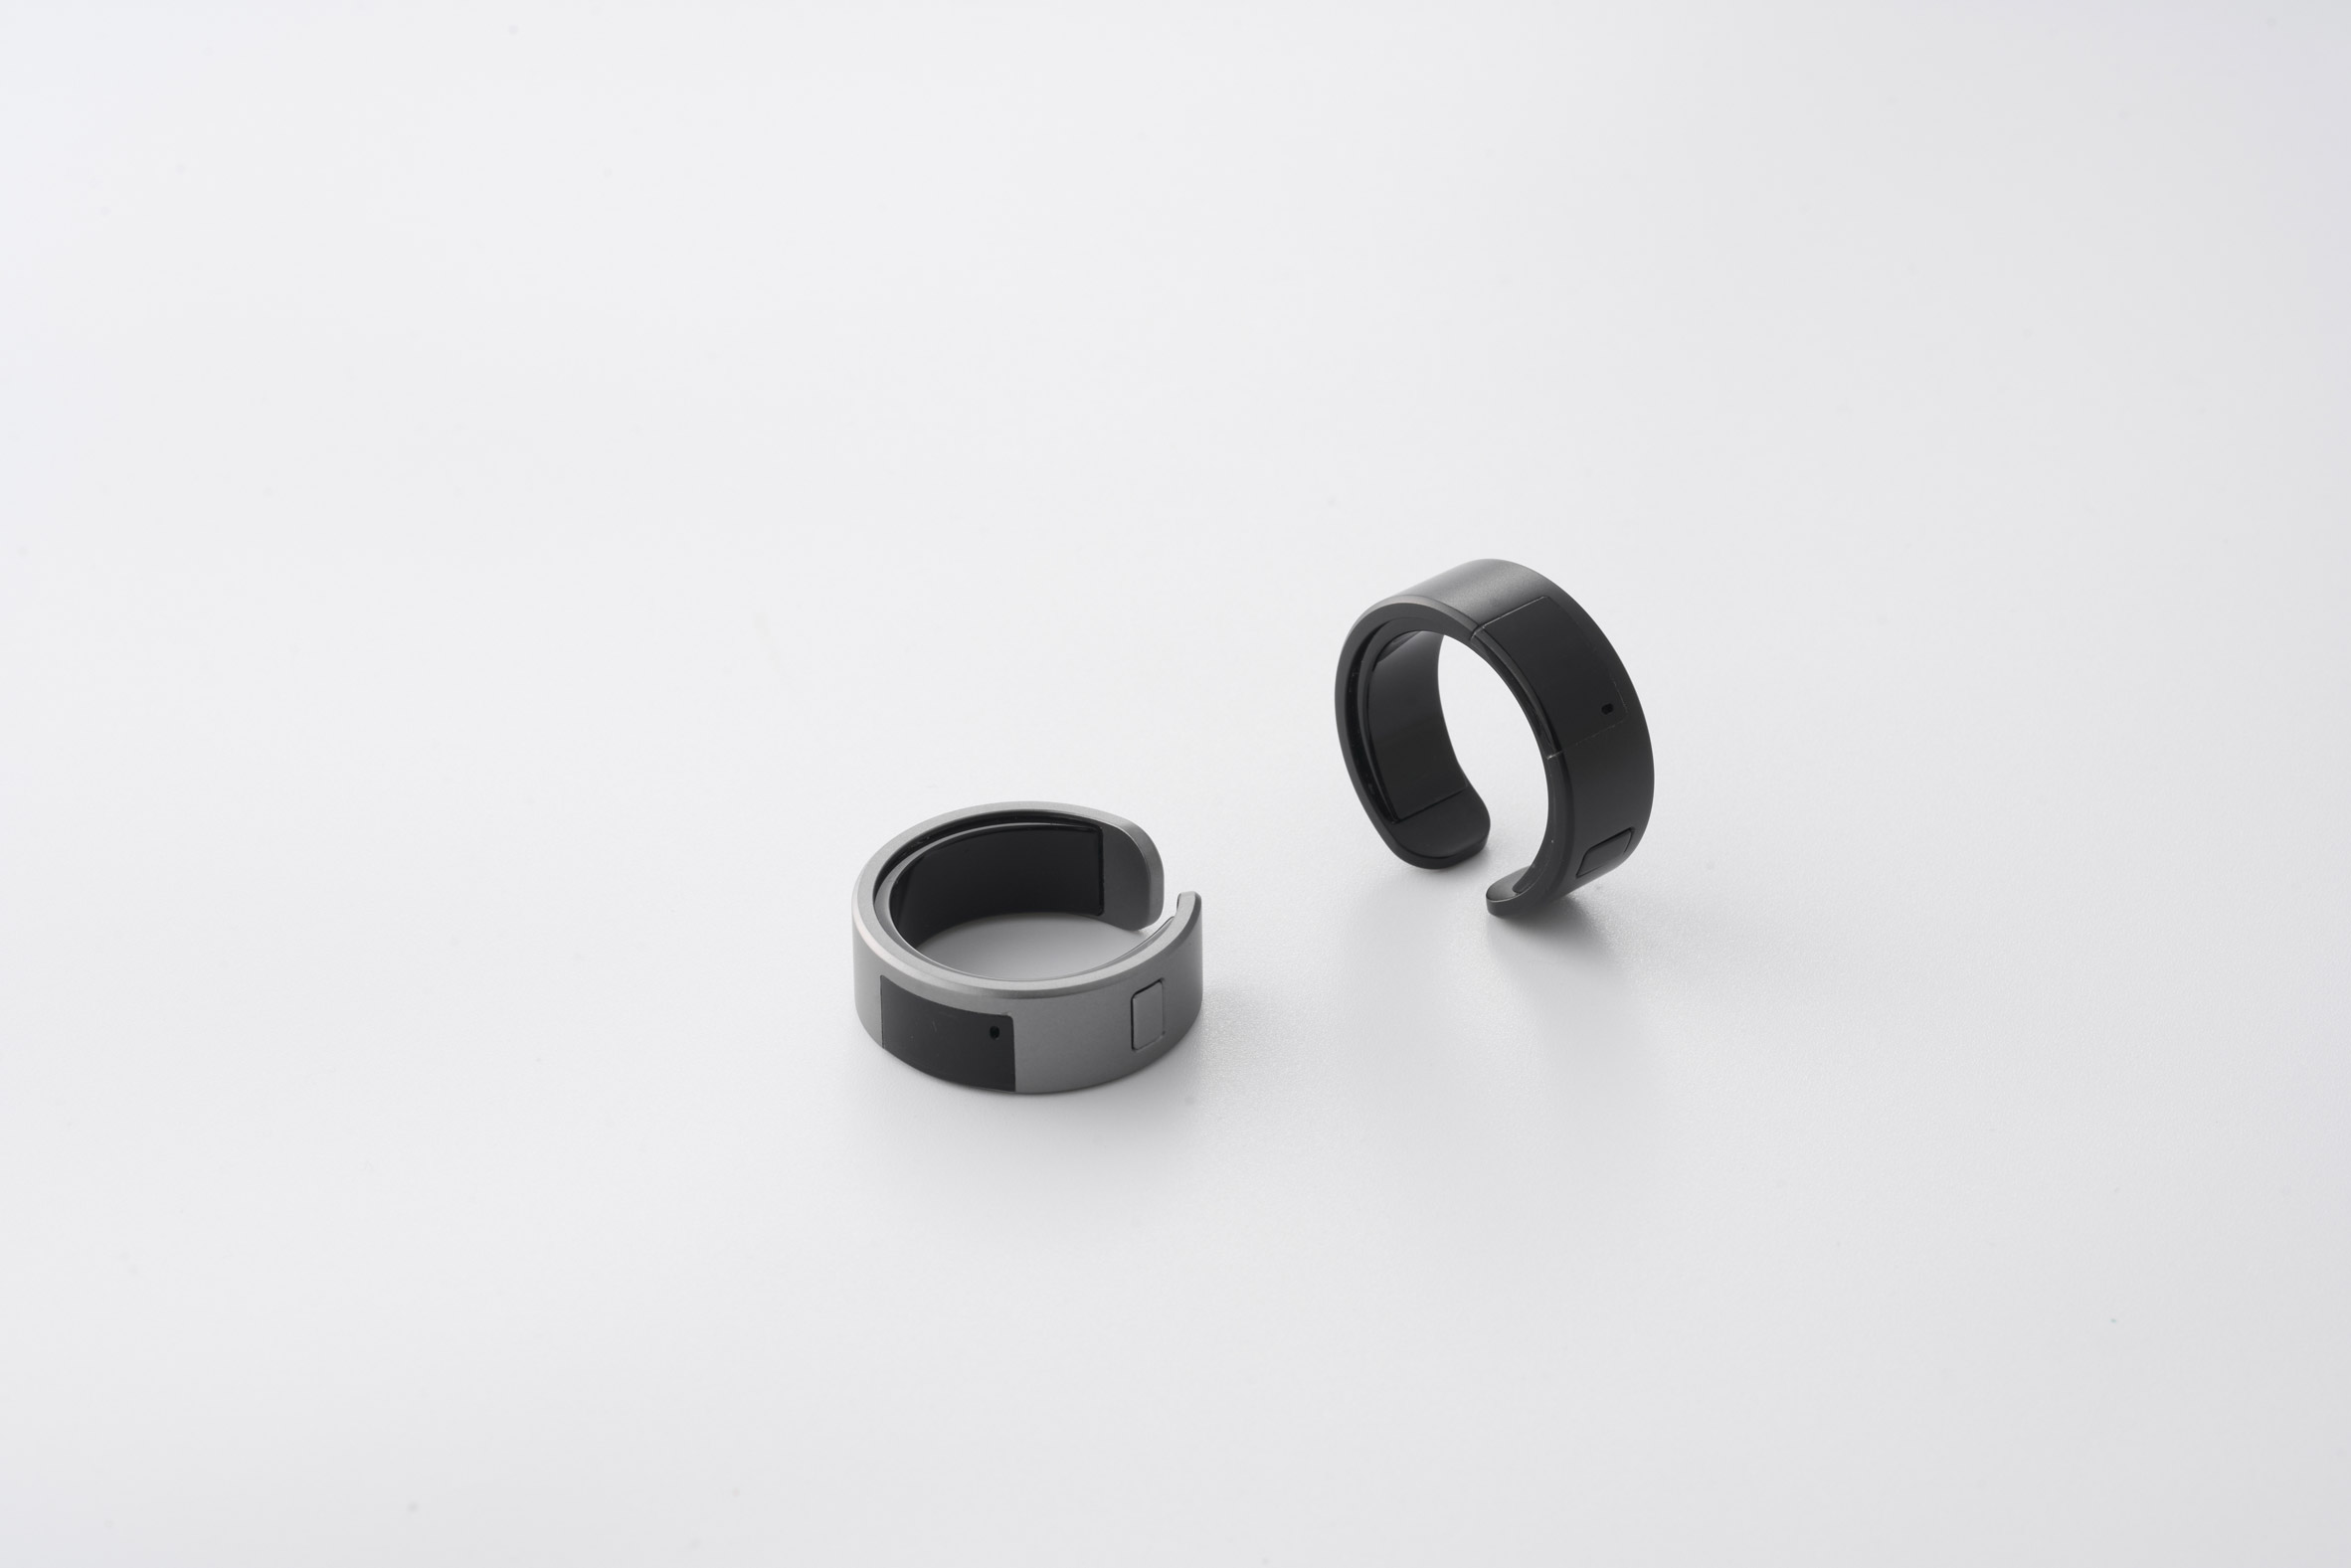 Photo of two WIZPR smart rings on a white surface, one silver one black